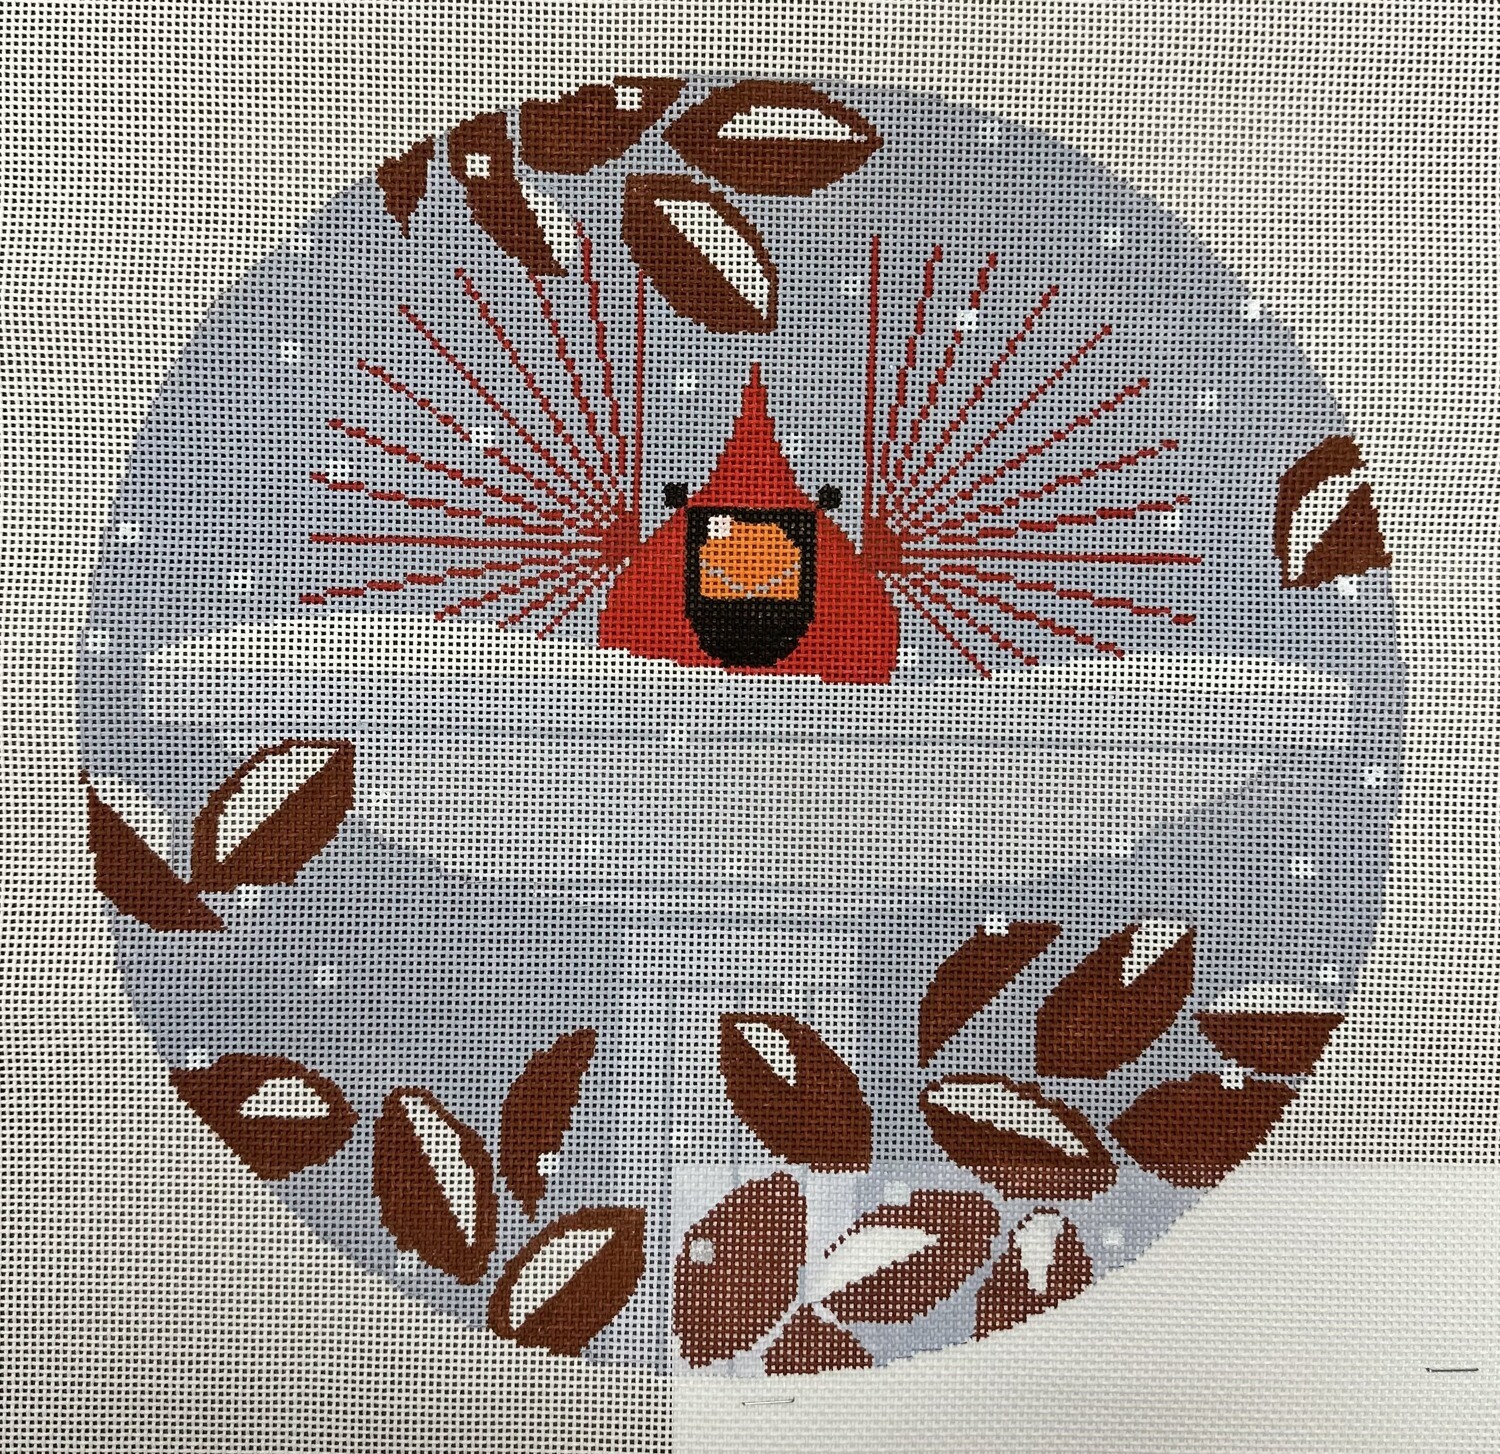 Bird Bath (Handpainted by Meredith Collection)